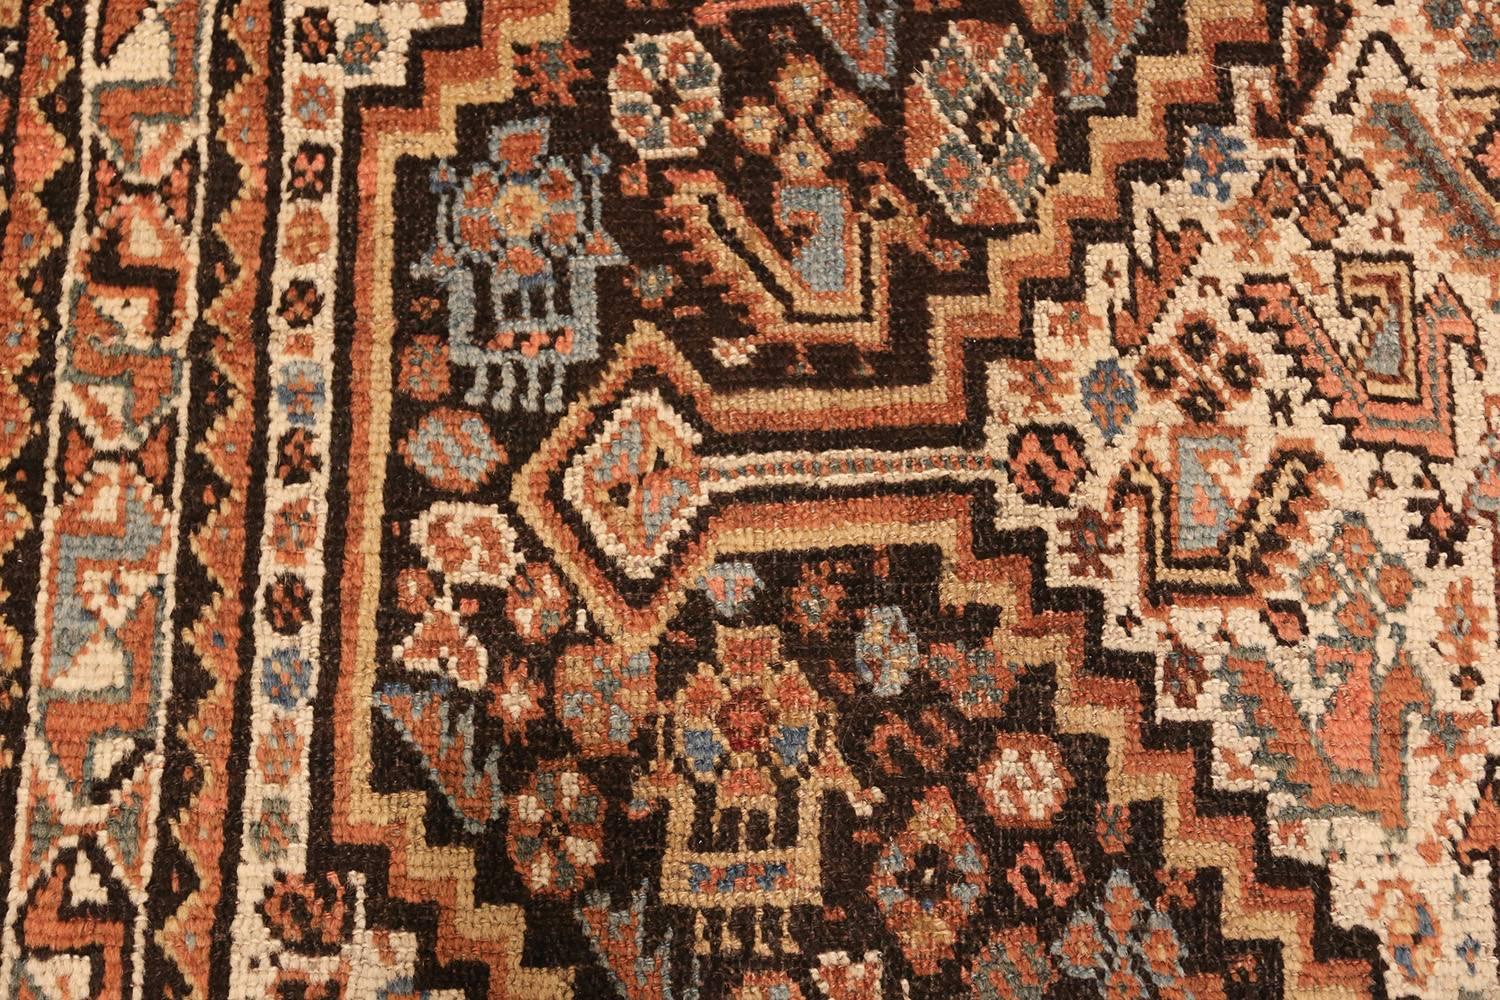 Antique Ghashgai Persian Rug, Country Of Origin: Persia, Circa Date: Turn of the Twentieth Century – Size: 4 ft x 5 ft 2 in (1.22 m x 1.57 m)

Exceedingly complex throughout, this charming antique Ghashgai rug features an exciting array of abstract,